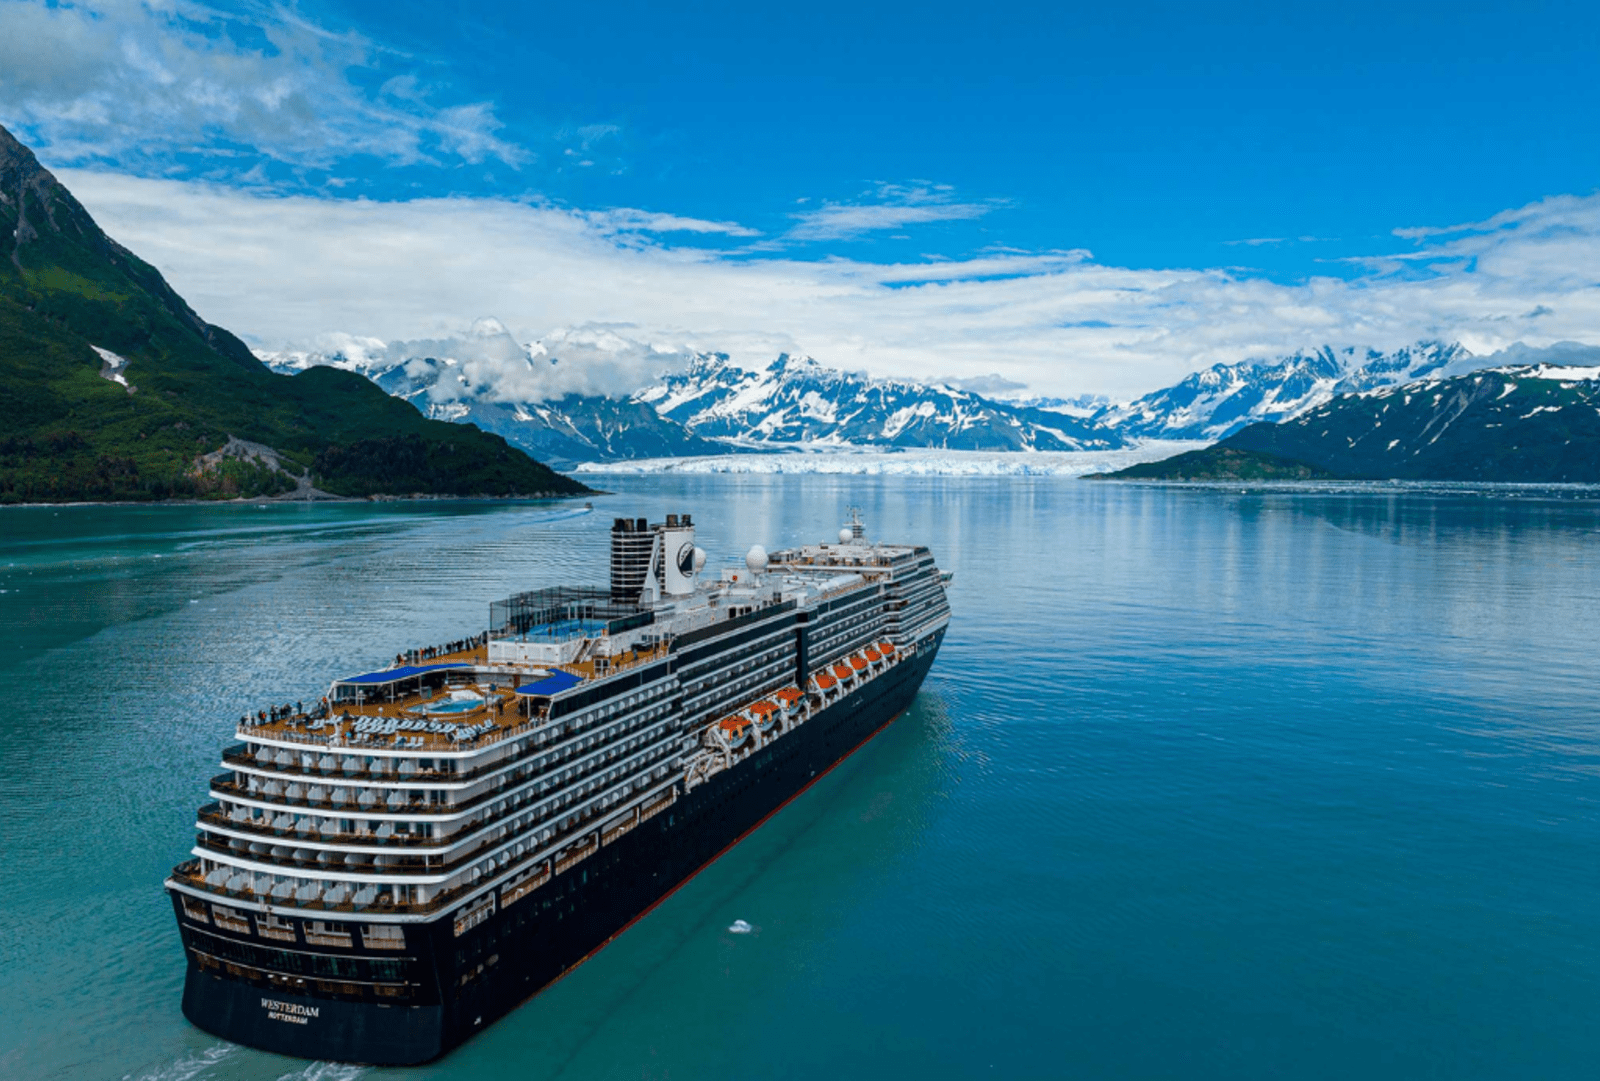 A cruise ship sails along a channel where mountains and glaciers meet the sea